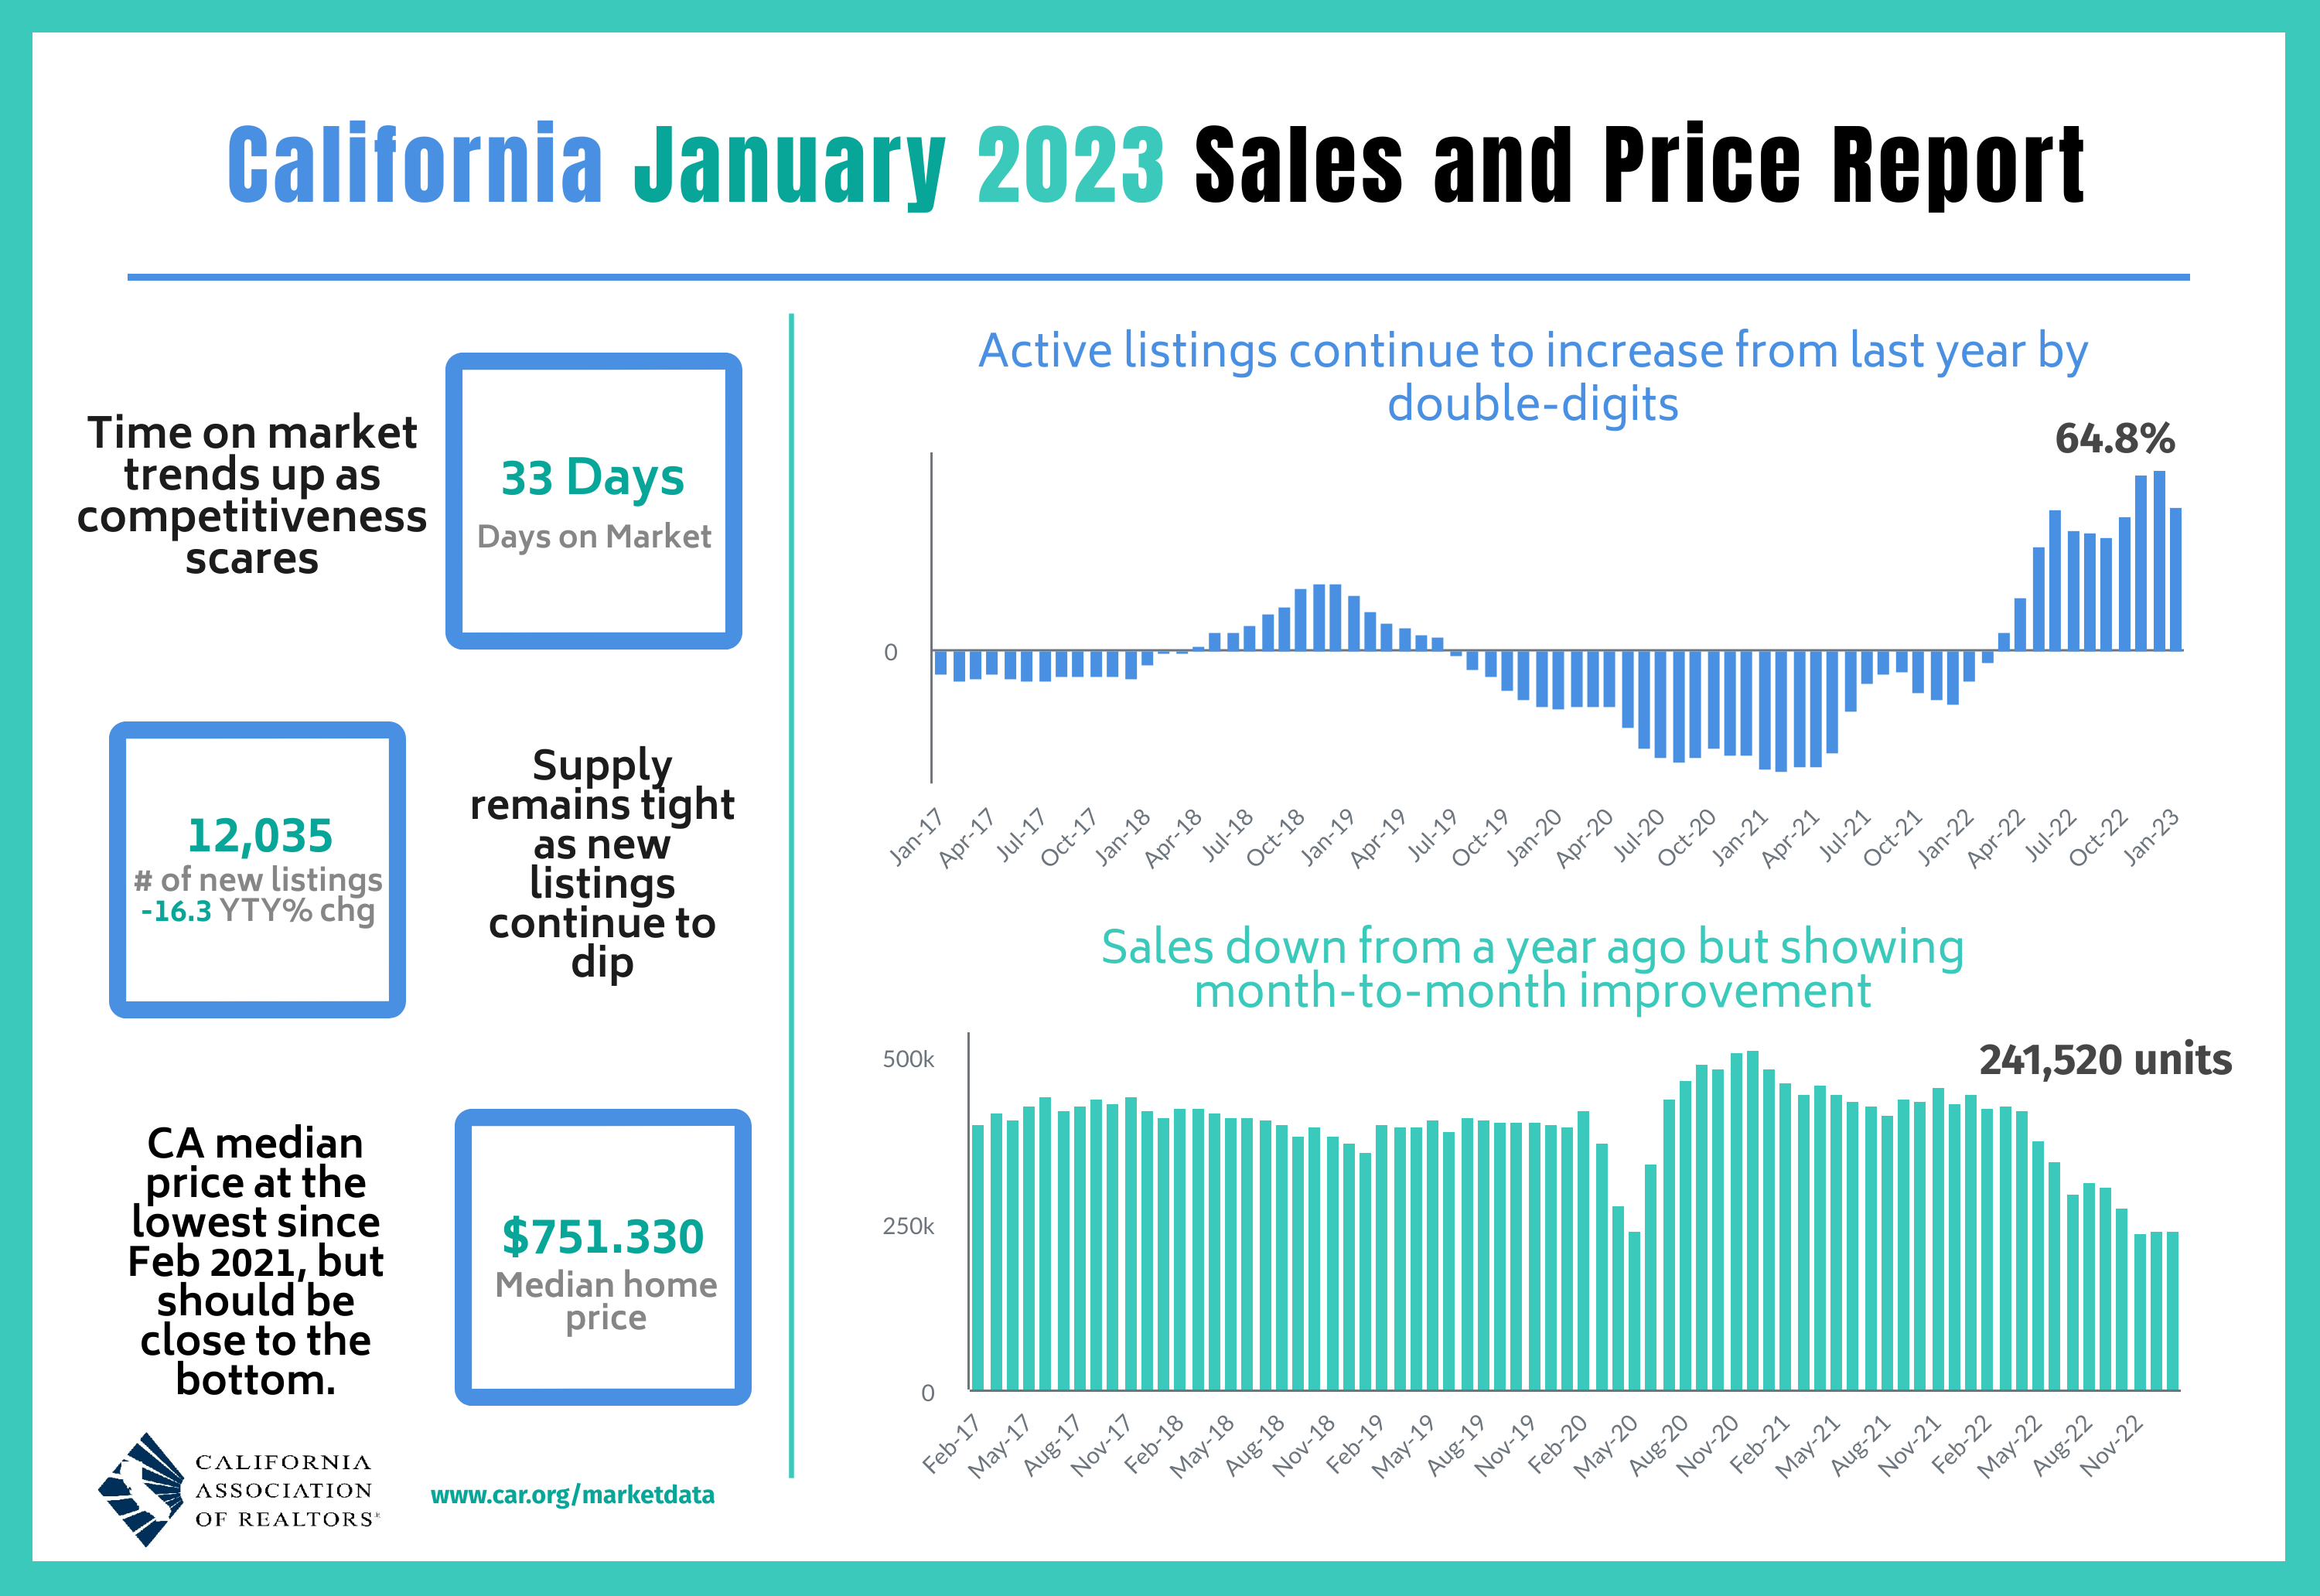 California January 2023 Sales and Price Report